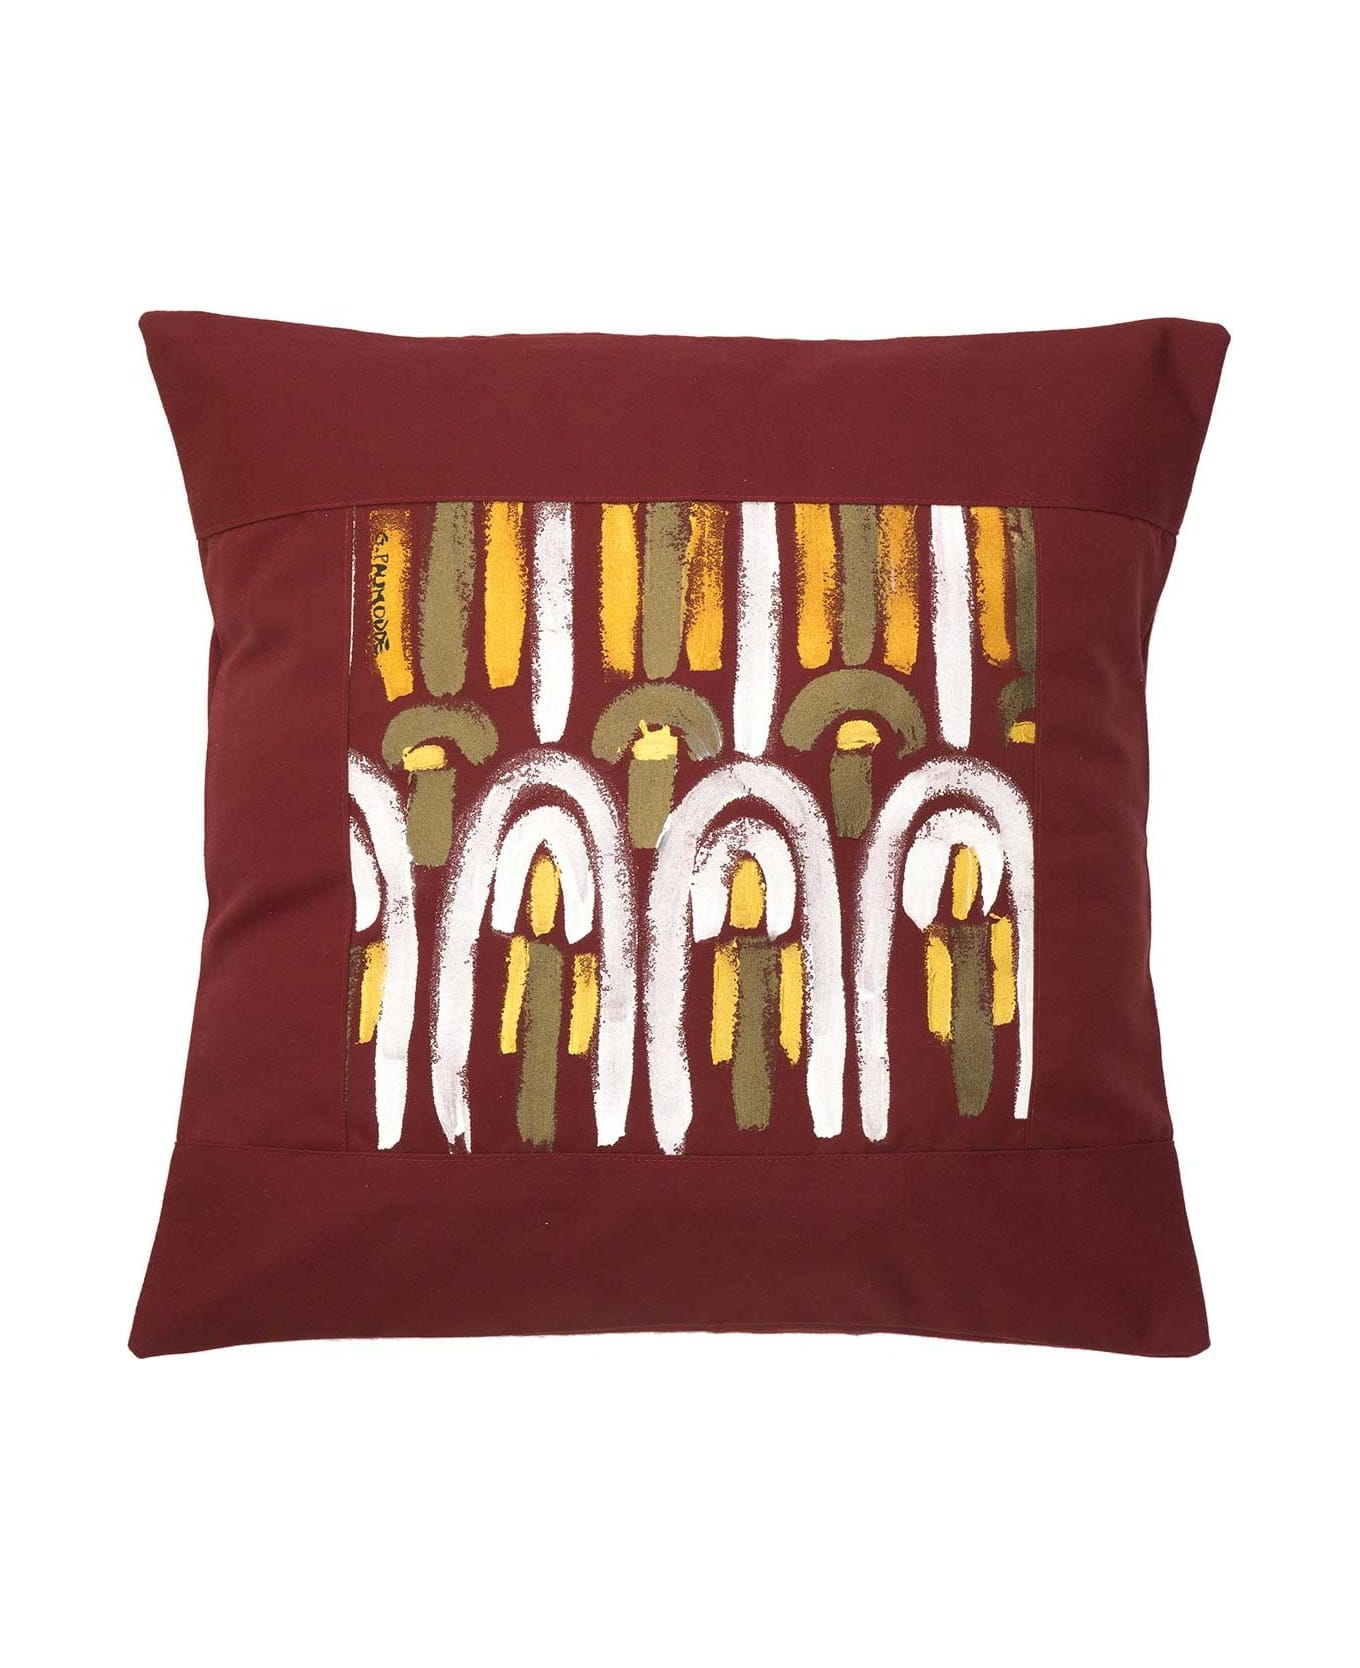 Le Botteghe su Gologone Acrylic Hand Painted Outdoor Cushion 40x40 cm - Red Fantasy